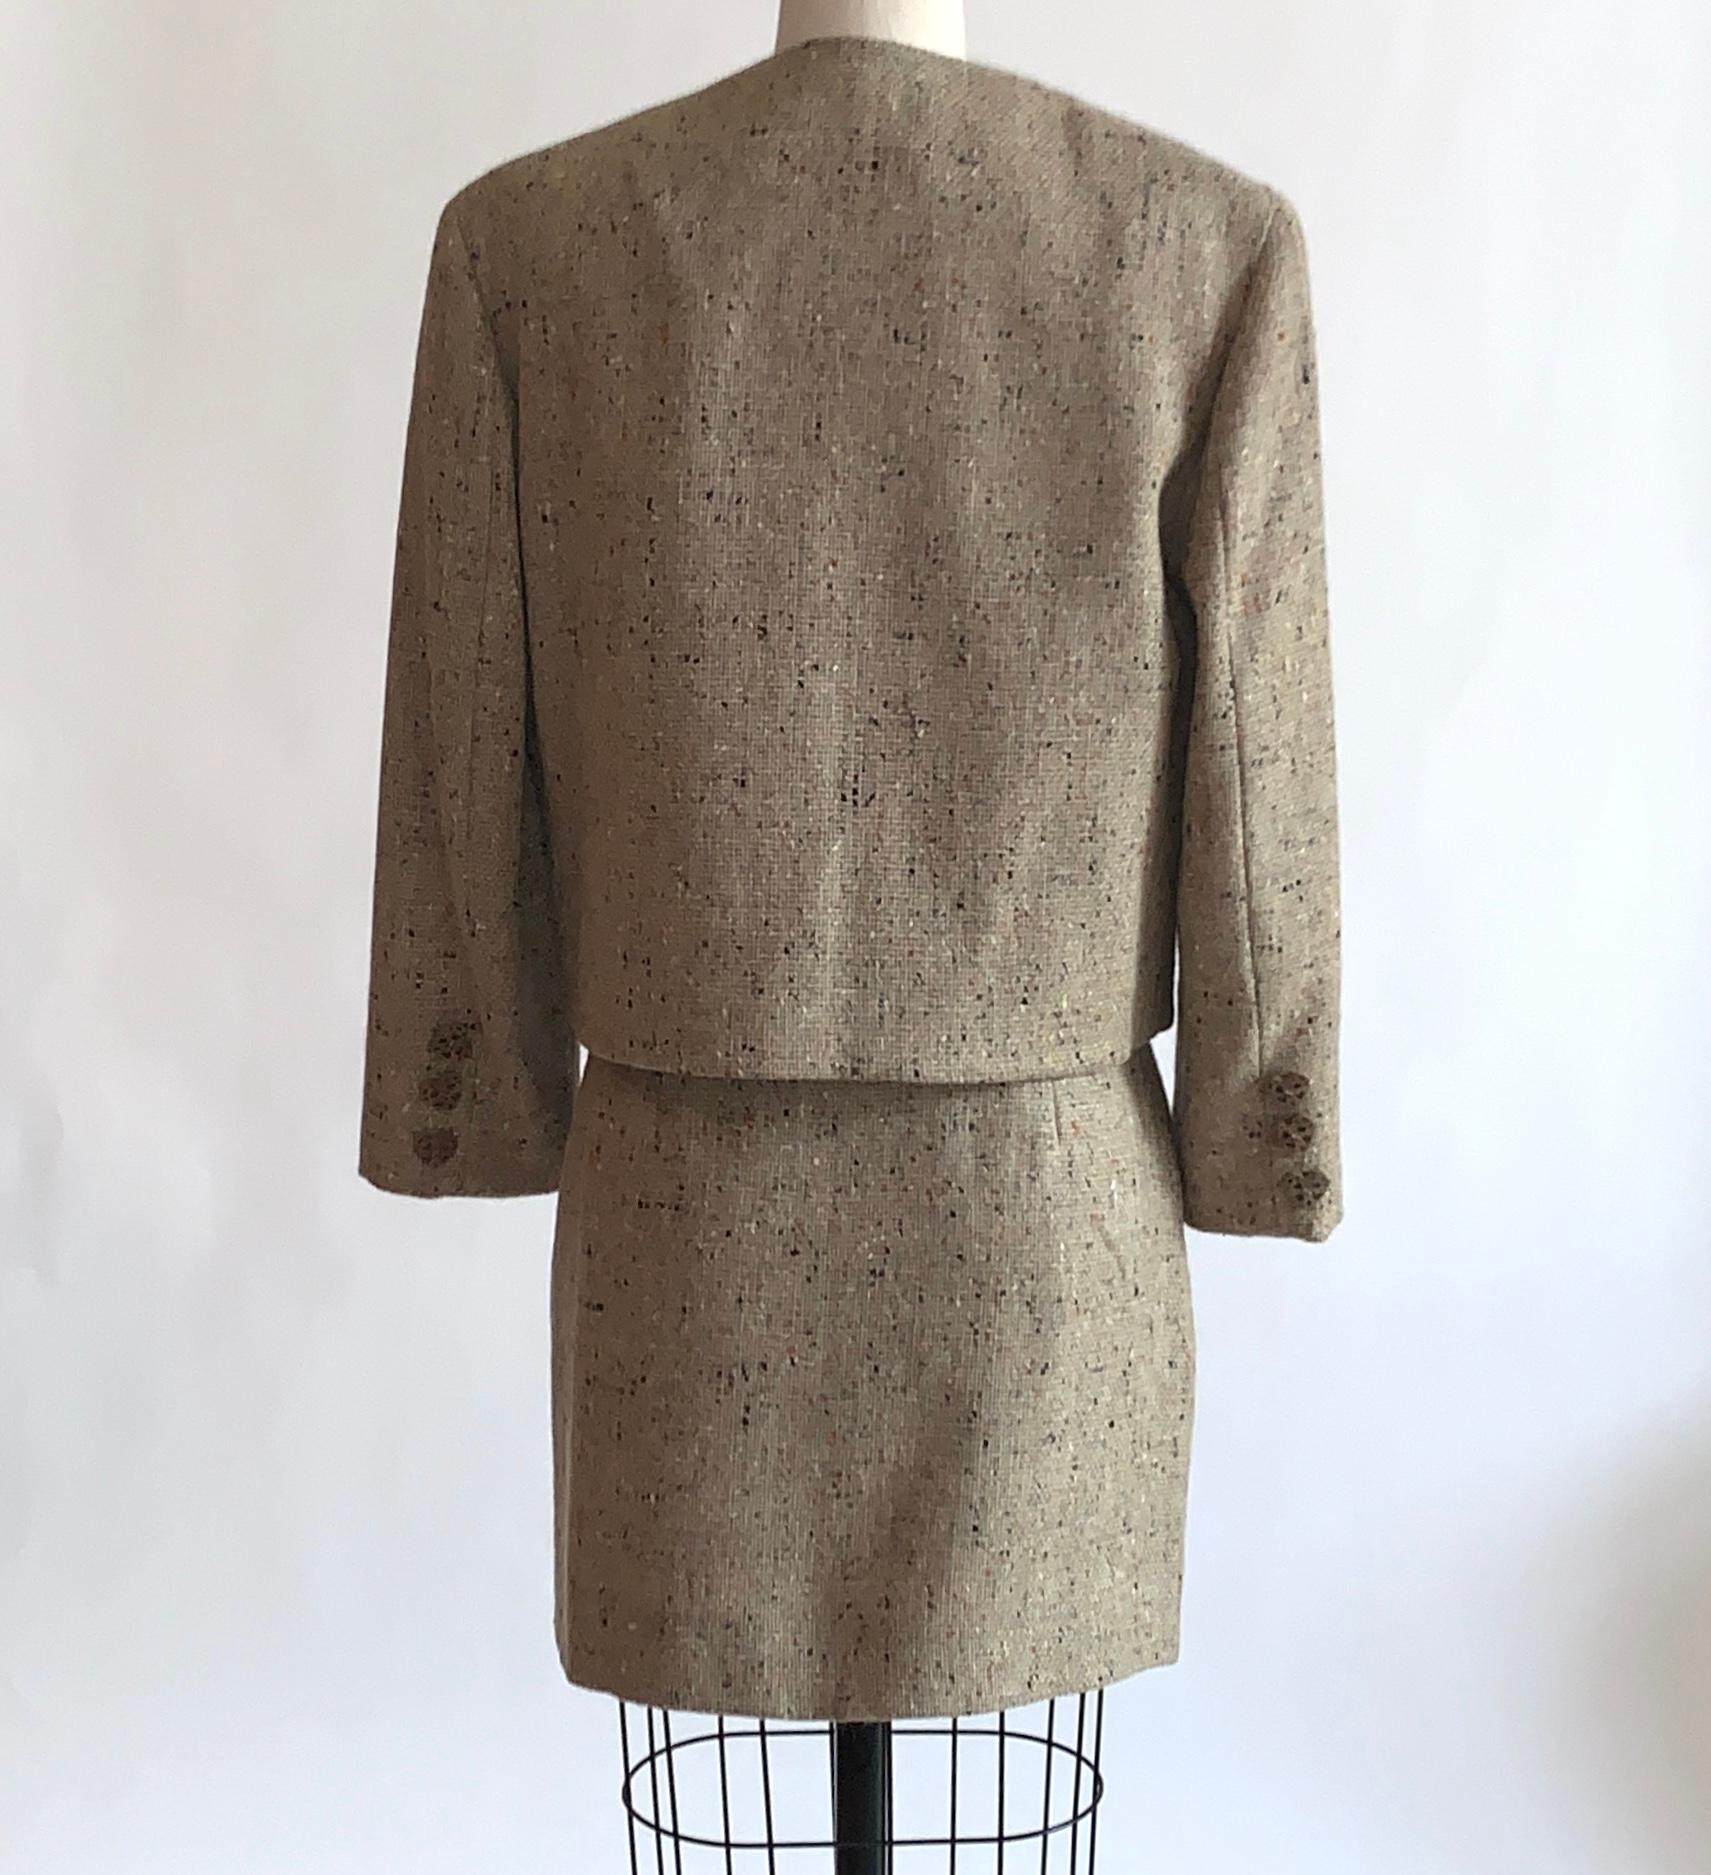 Gray New Moschino Cheap & Chic 1990s Oatmeal Tweed Skirt Suit with Heart Buttons